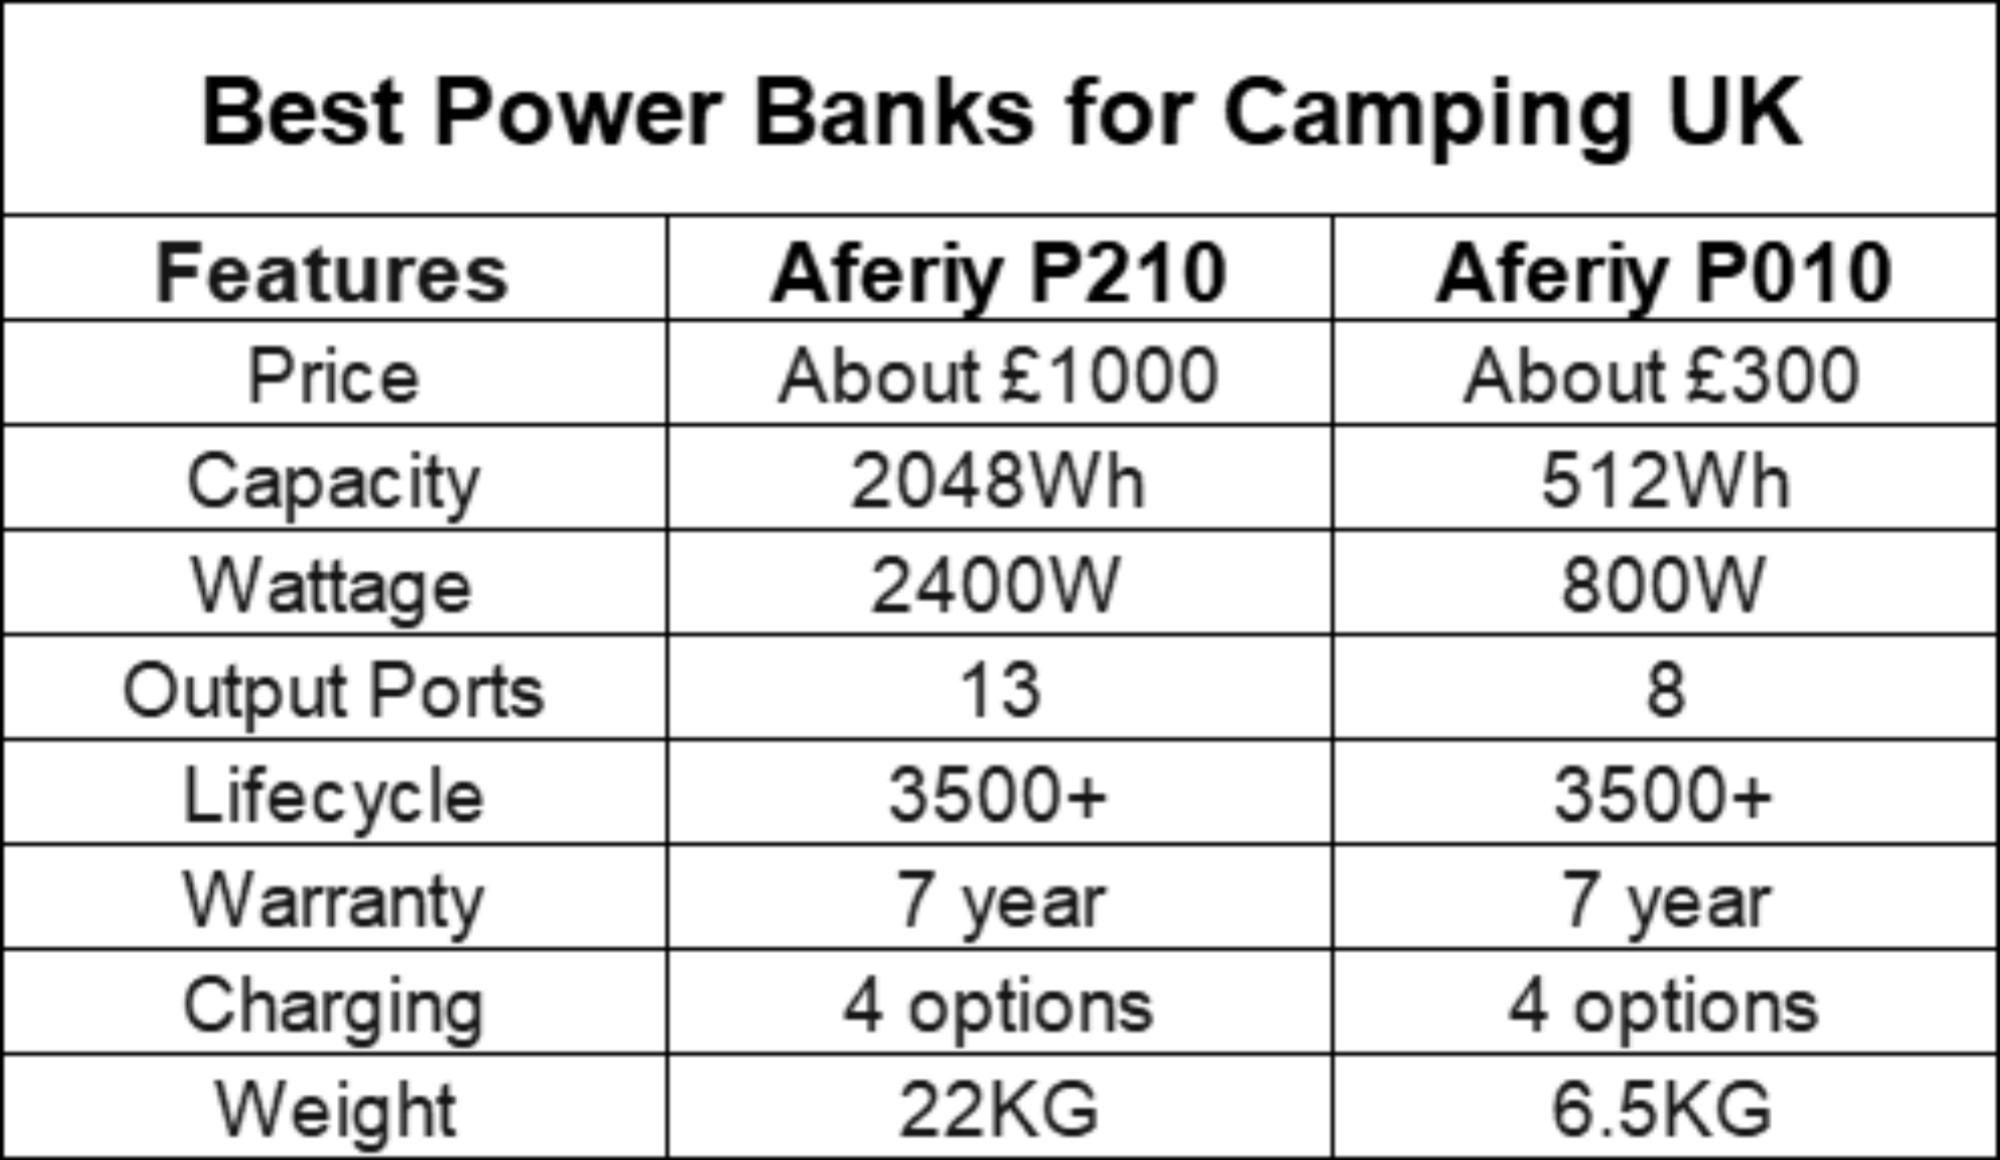 Best Power Banks for Camping UK